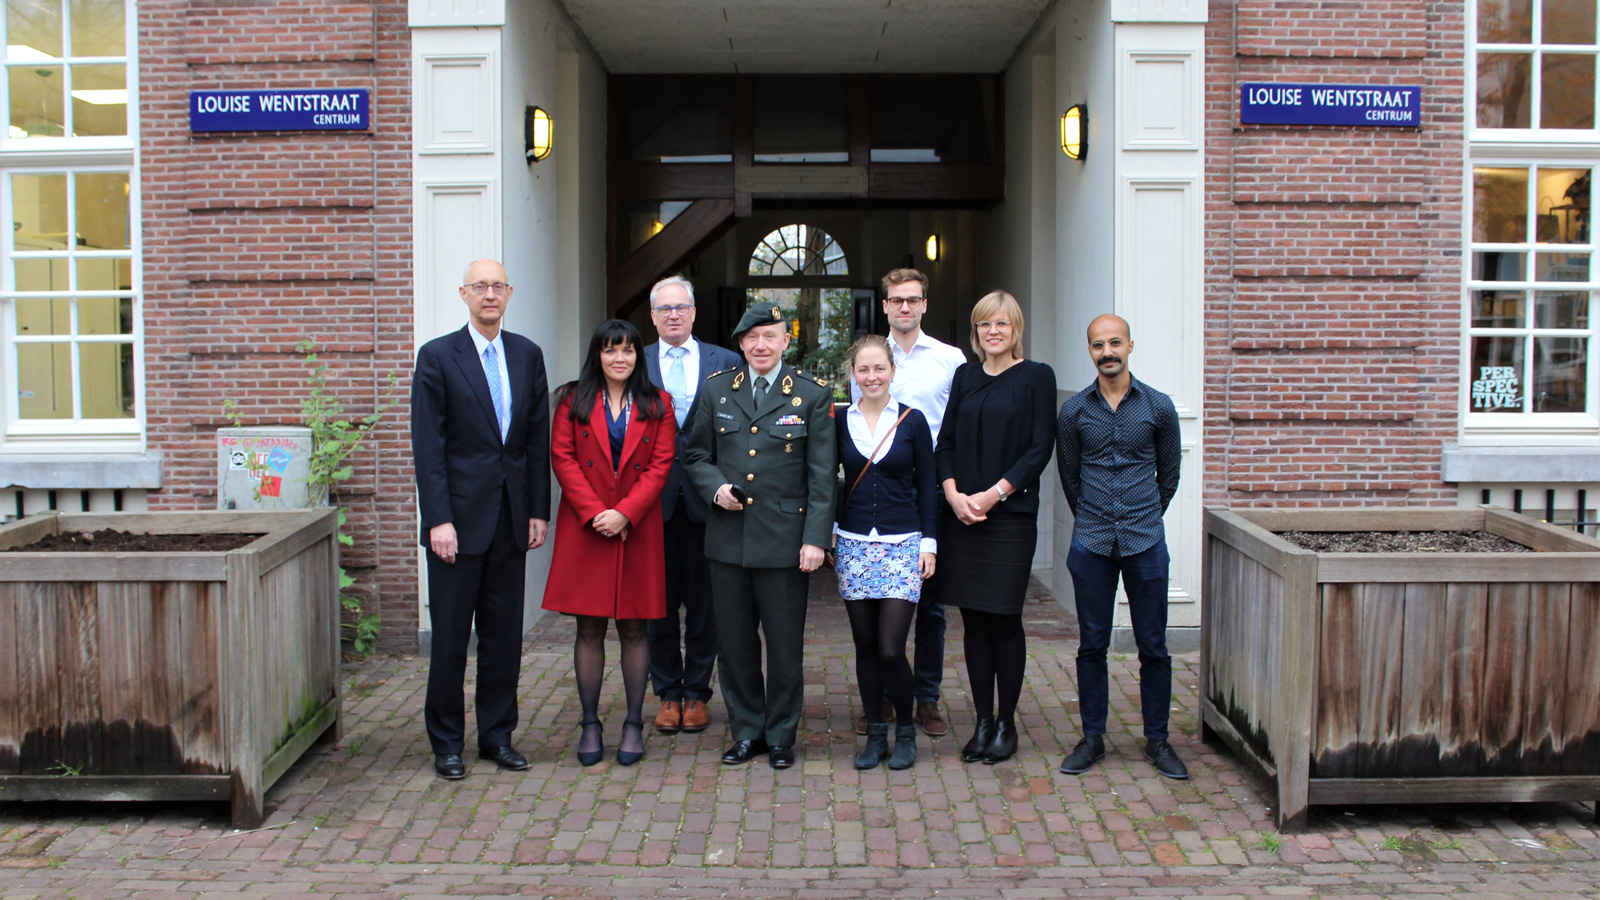 Evalan received an acknowledgement from the Minister of Defense Ank Bijleveld-Schouten